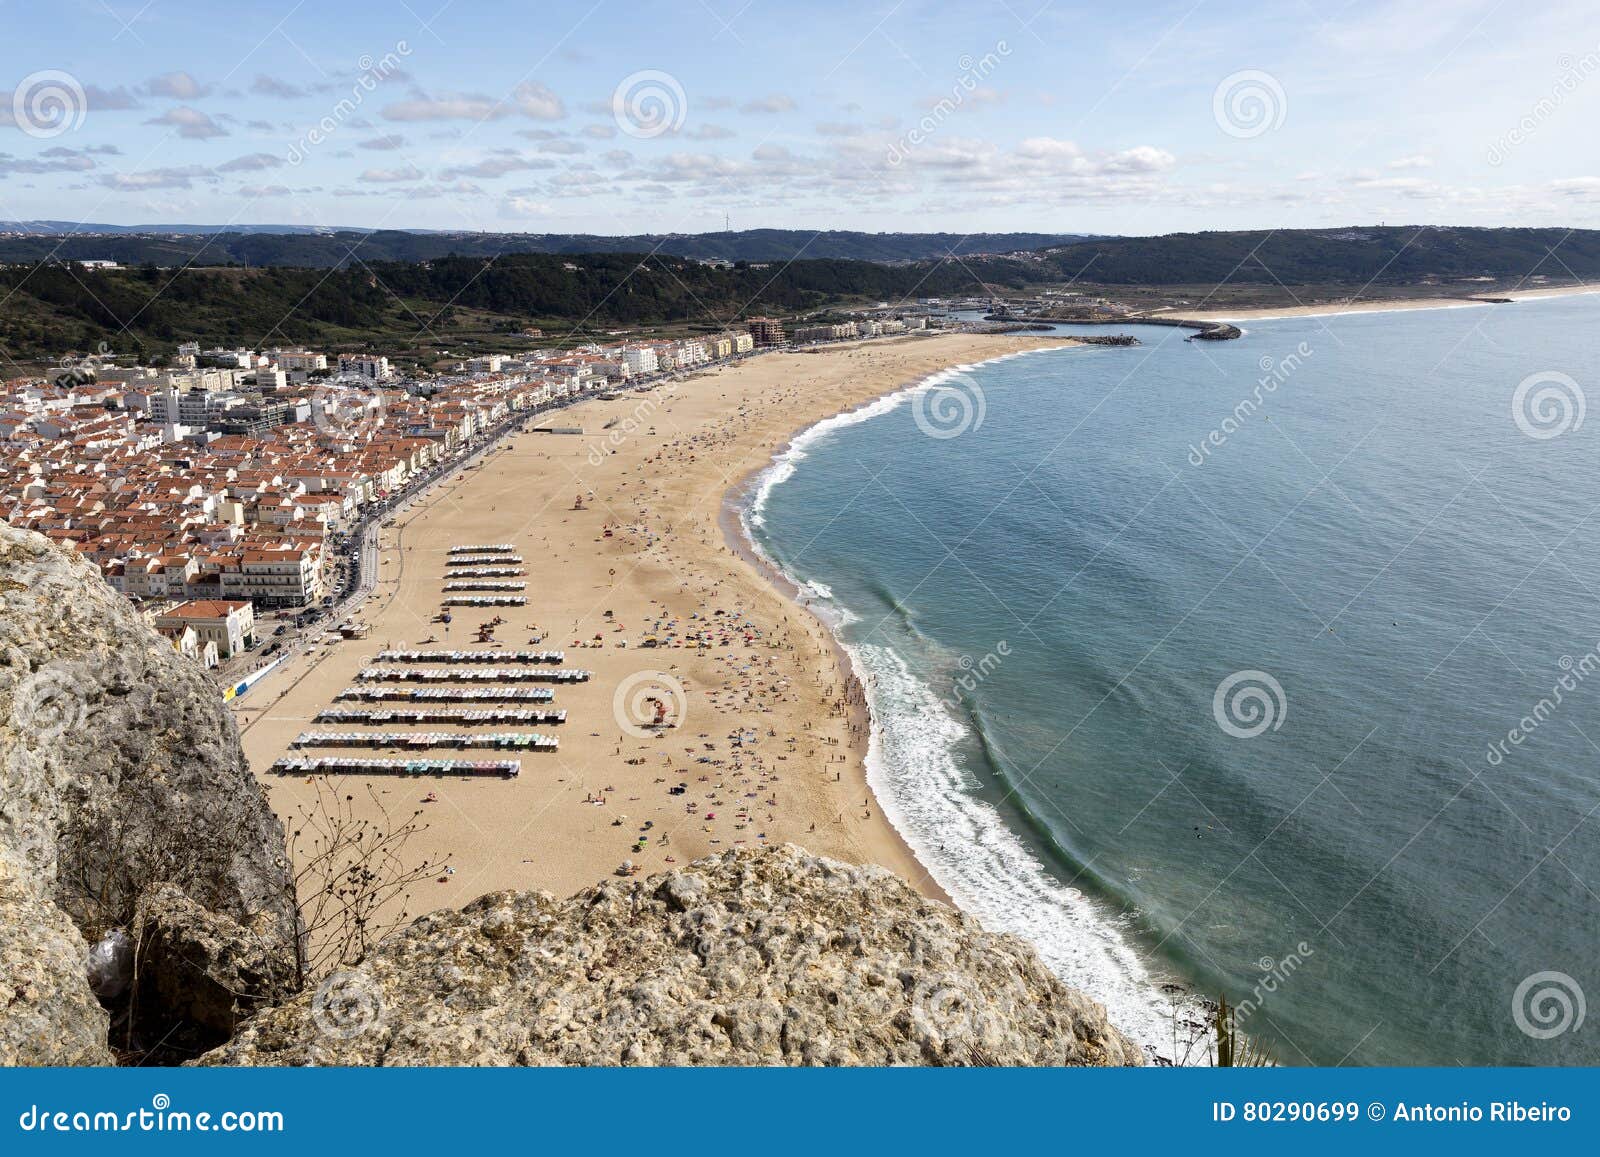 village of nazare seen from sitio